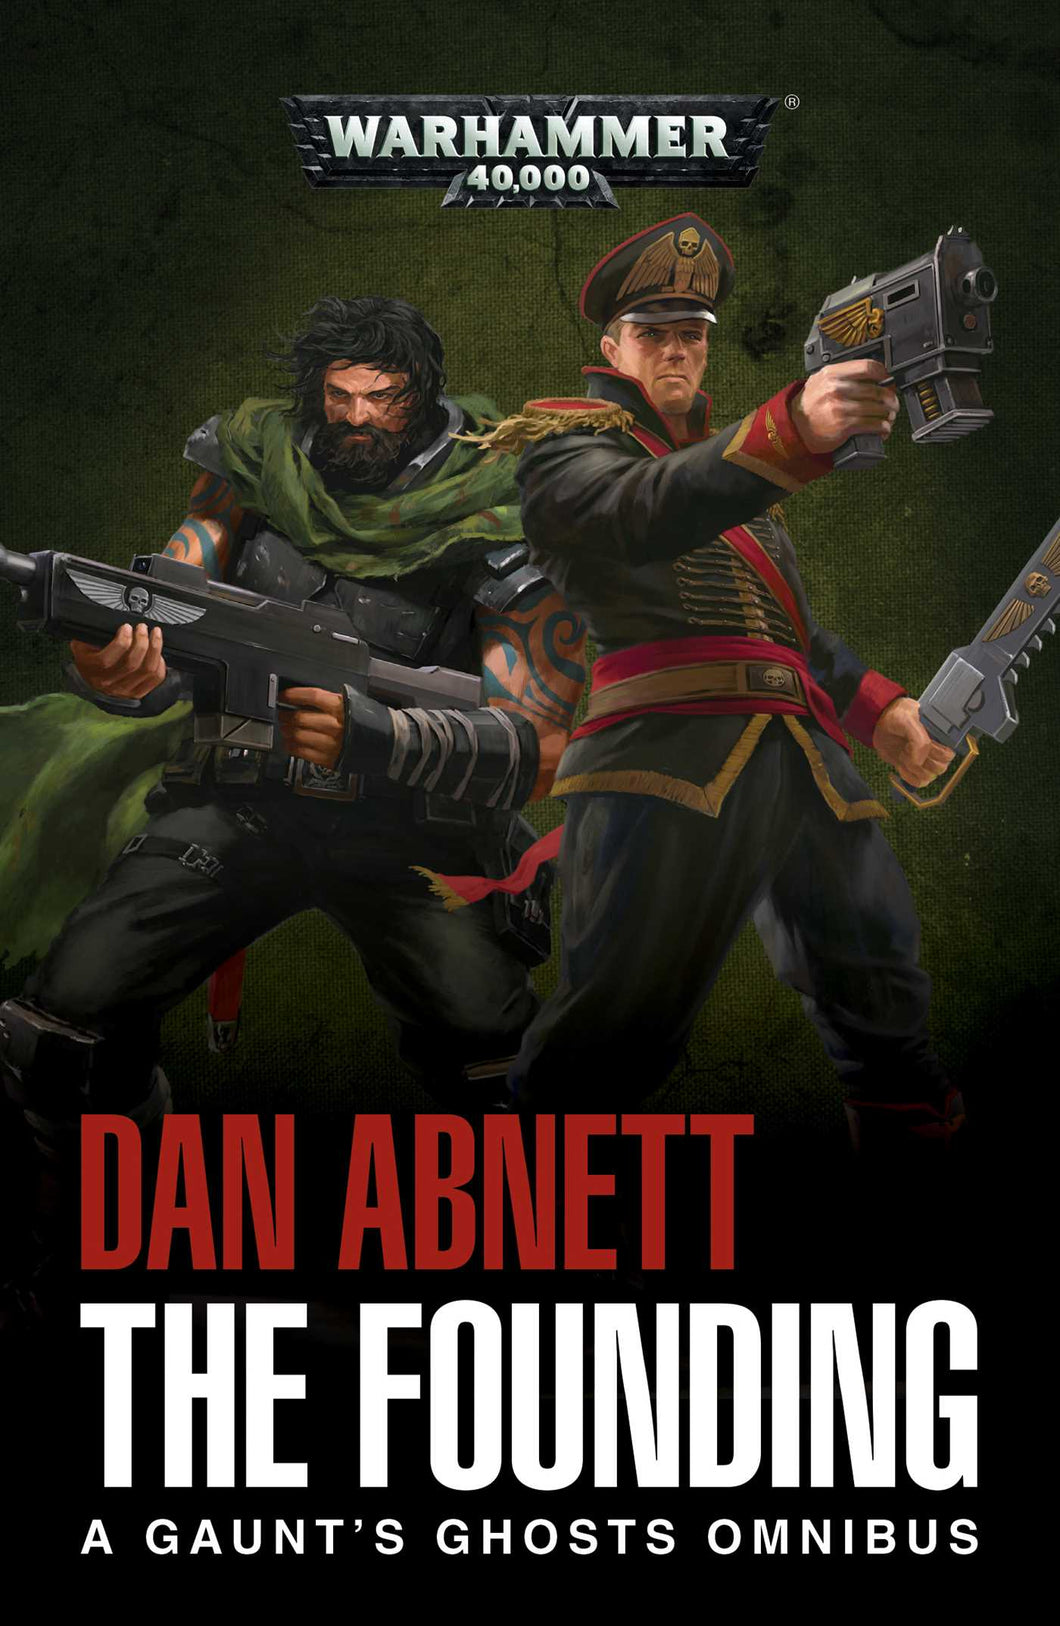 The Founding A Gaunt's Ghosts Omnibus